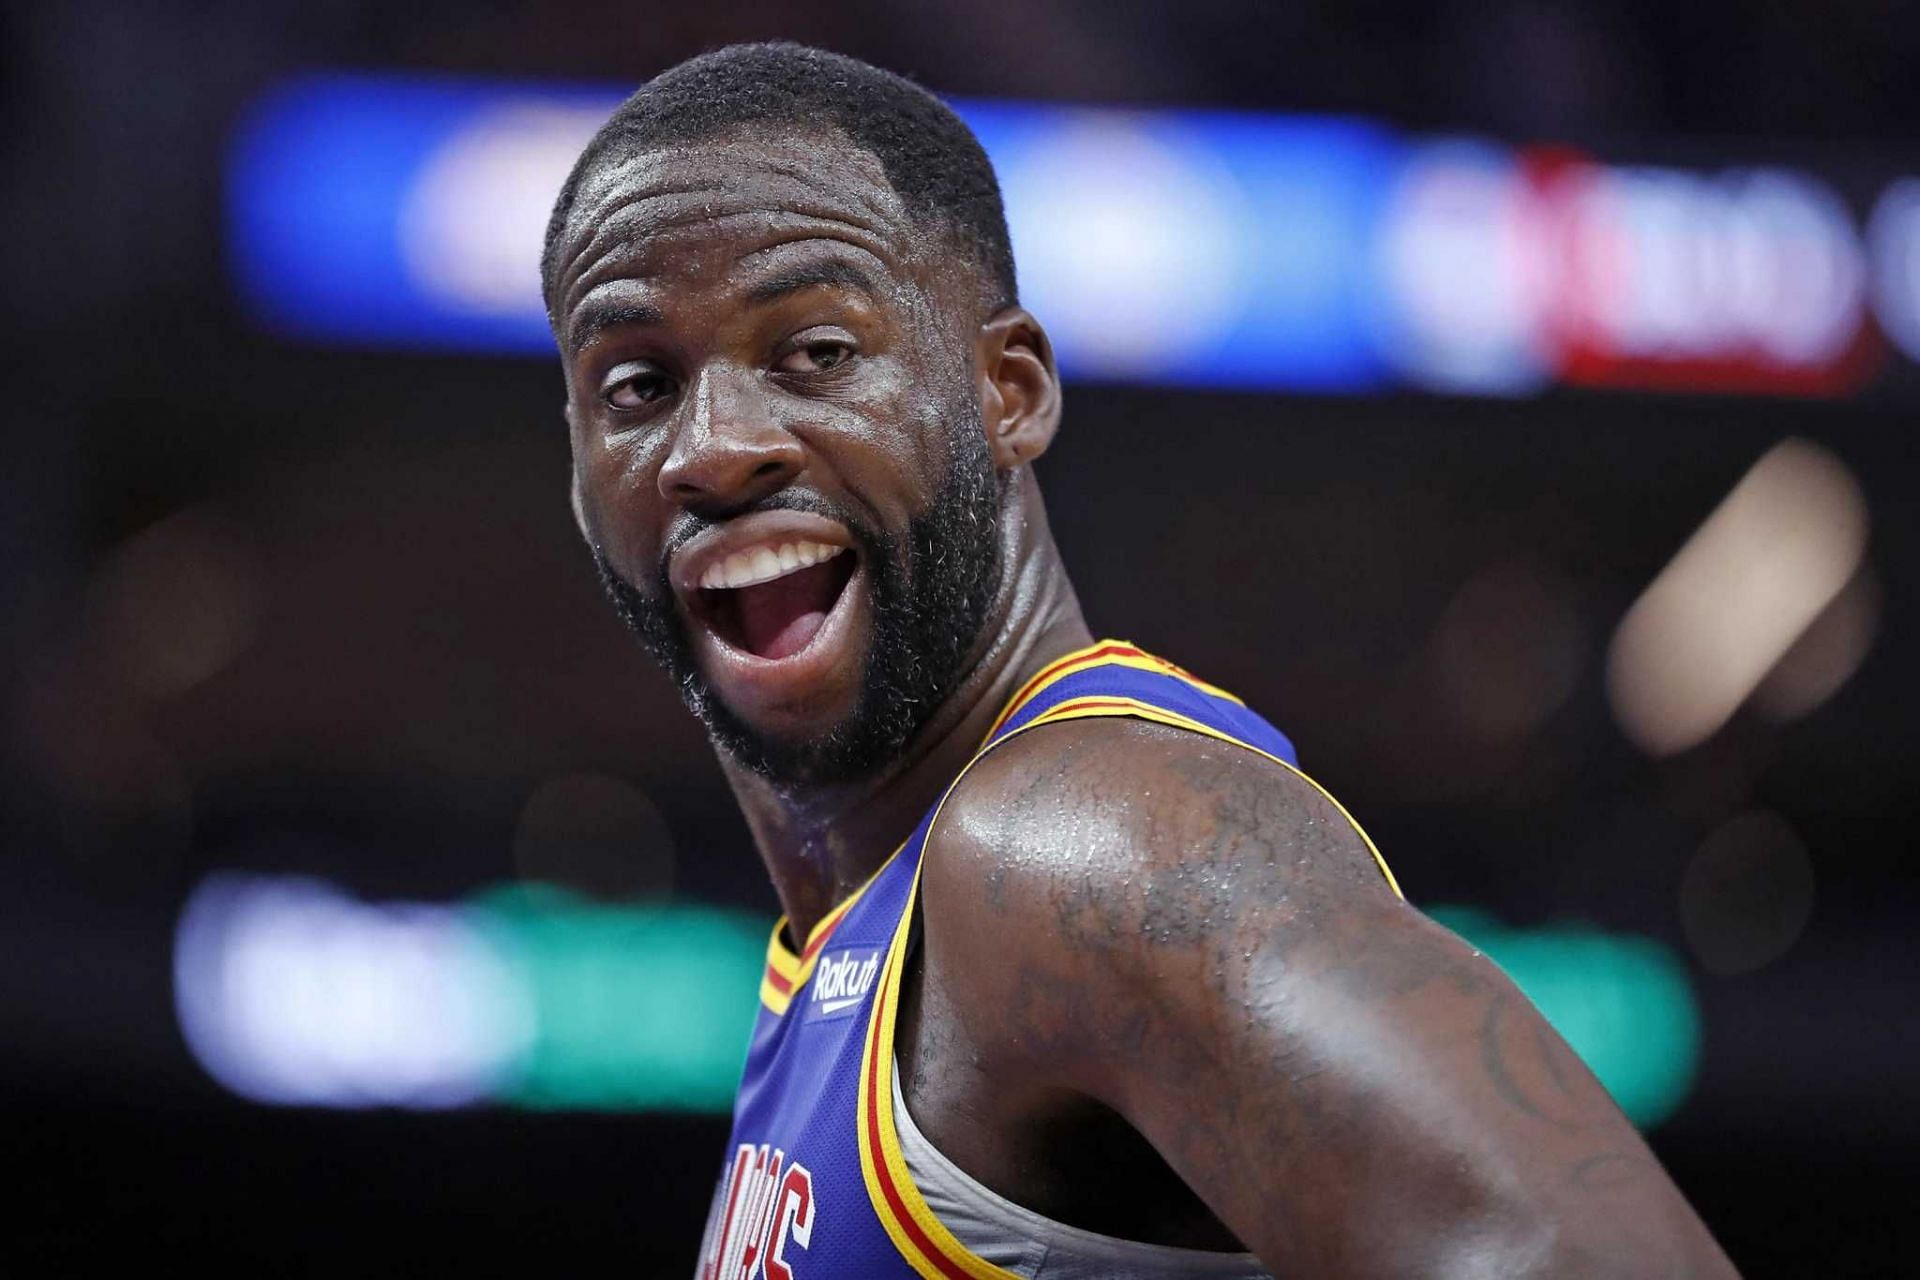 Golden State Warriors forward Draymond Green stays motivated to make it back to the playoffs